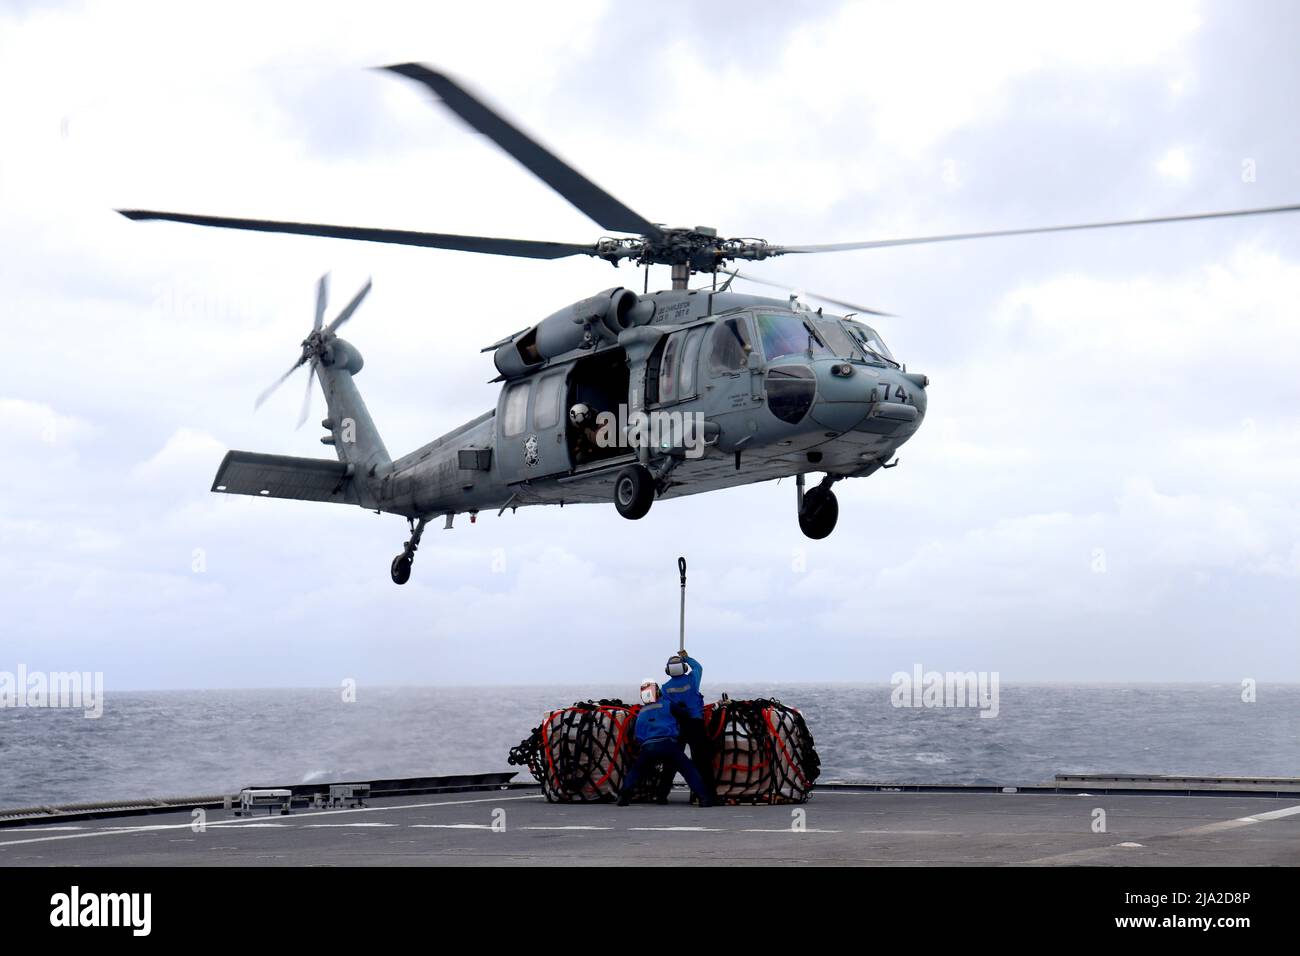 PHILIPPINE SEA (May 18, 2022) Boatswain's Mate 3rd Class Kameron Clinton,  from Eustis, Florida, signals to the pilots in an MH-60R Seahawk during  flight operations aboard Arleigh Burke-class guided-missile destroyer USS  Dewey (